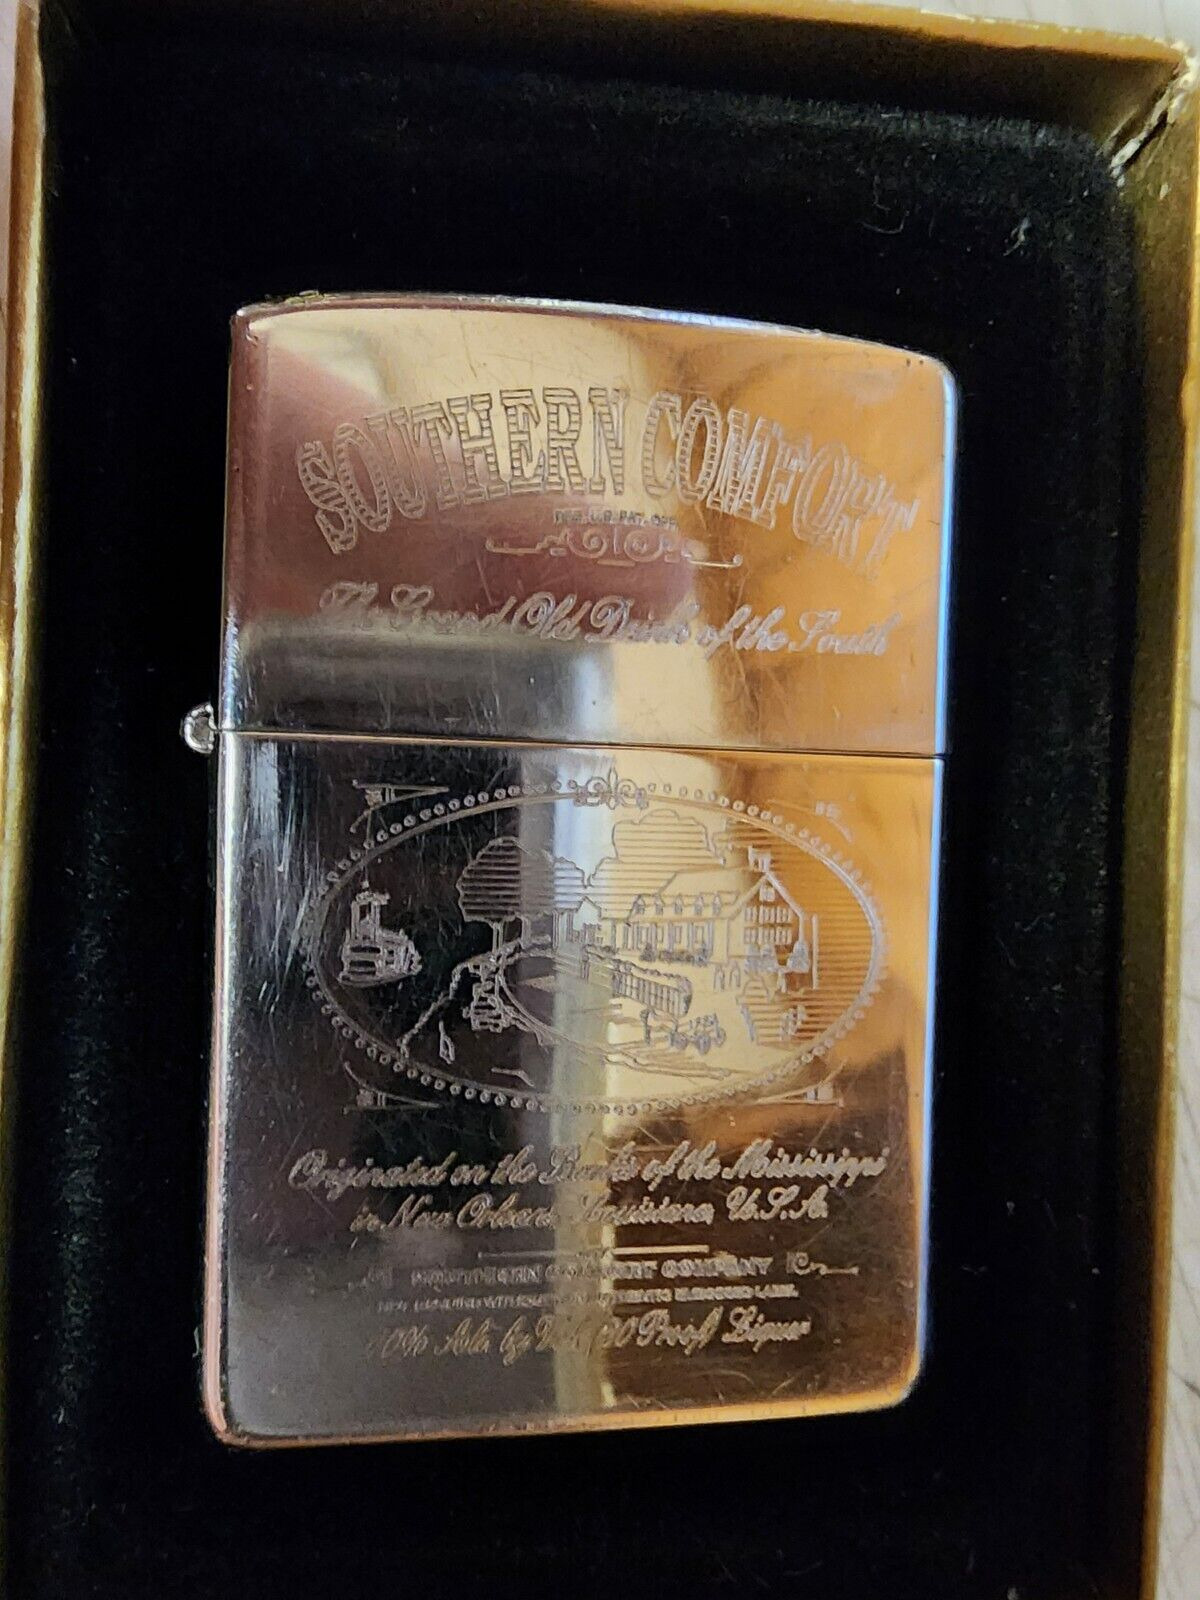 1993 ZIPPO SOUTHERN COMFORT Lighter WHISKEY- Grand Old Drink of the South - RARE